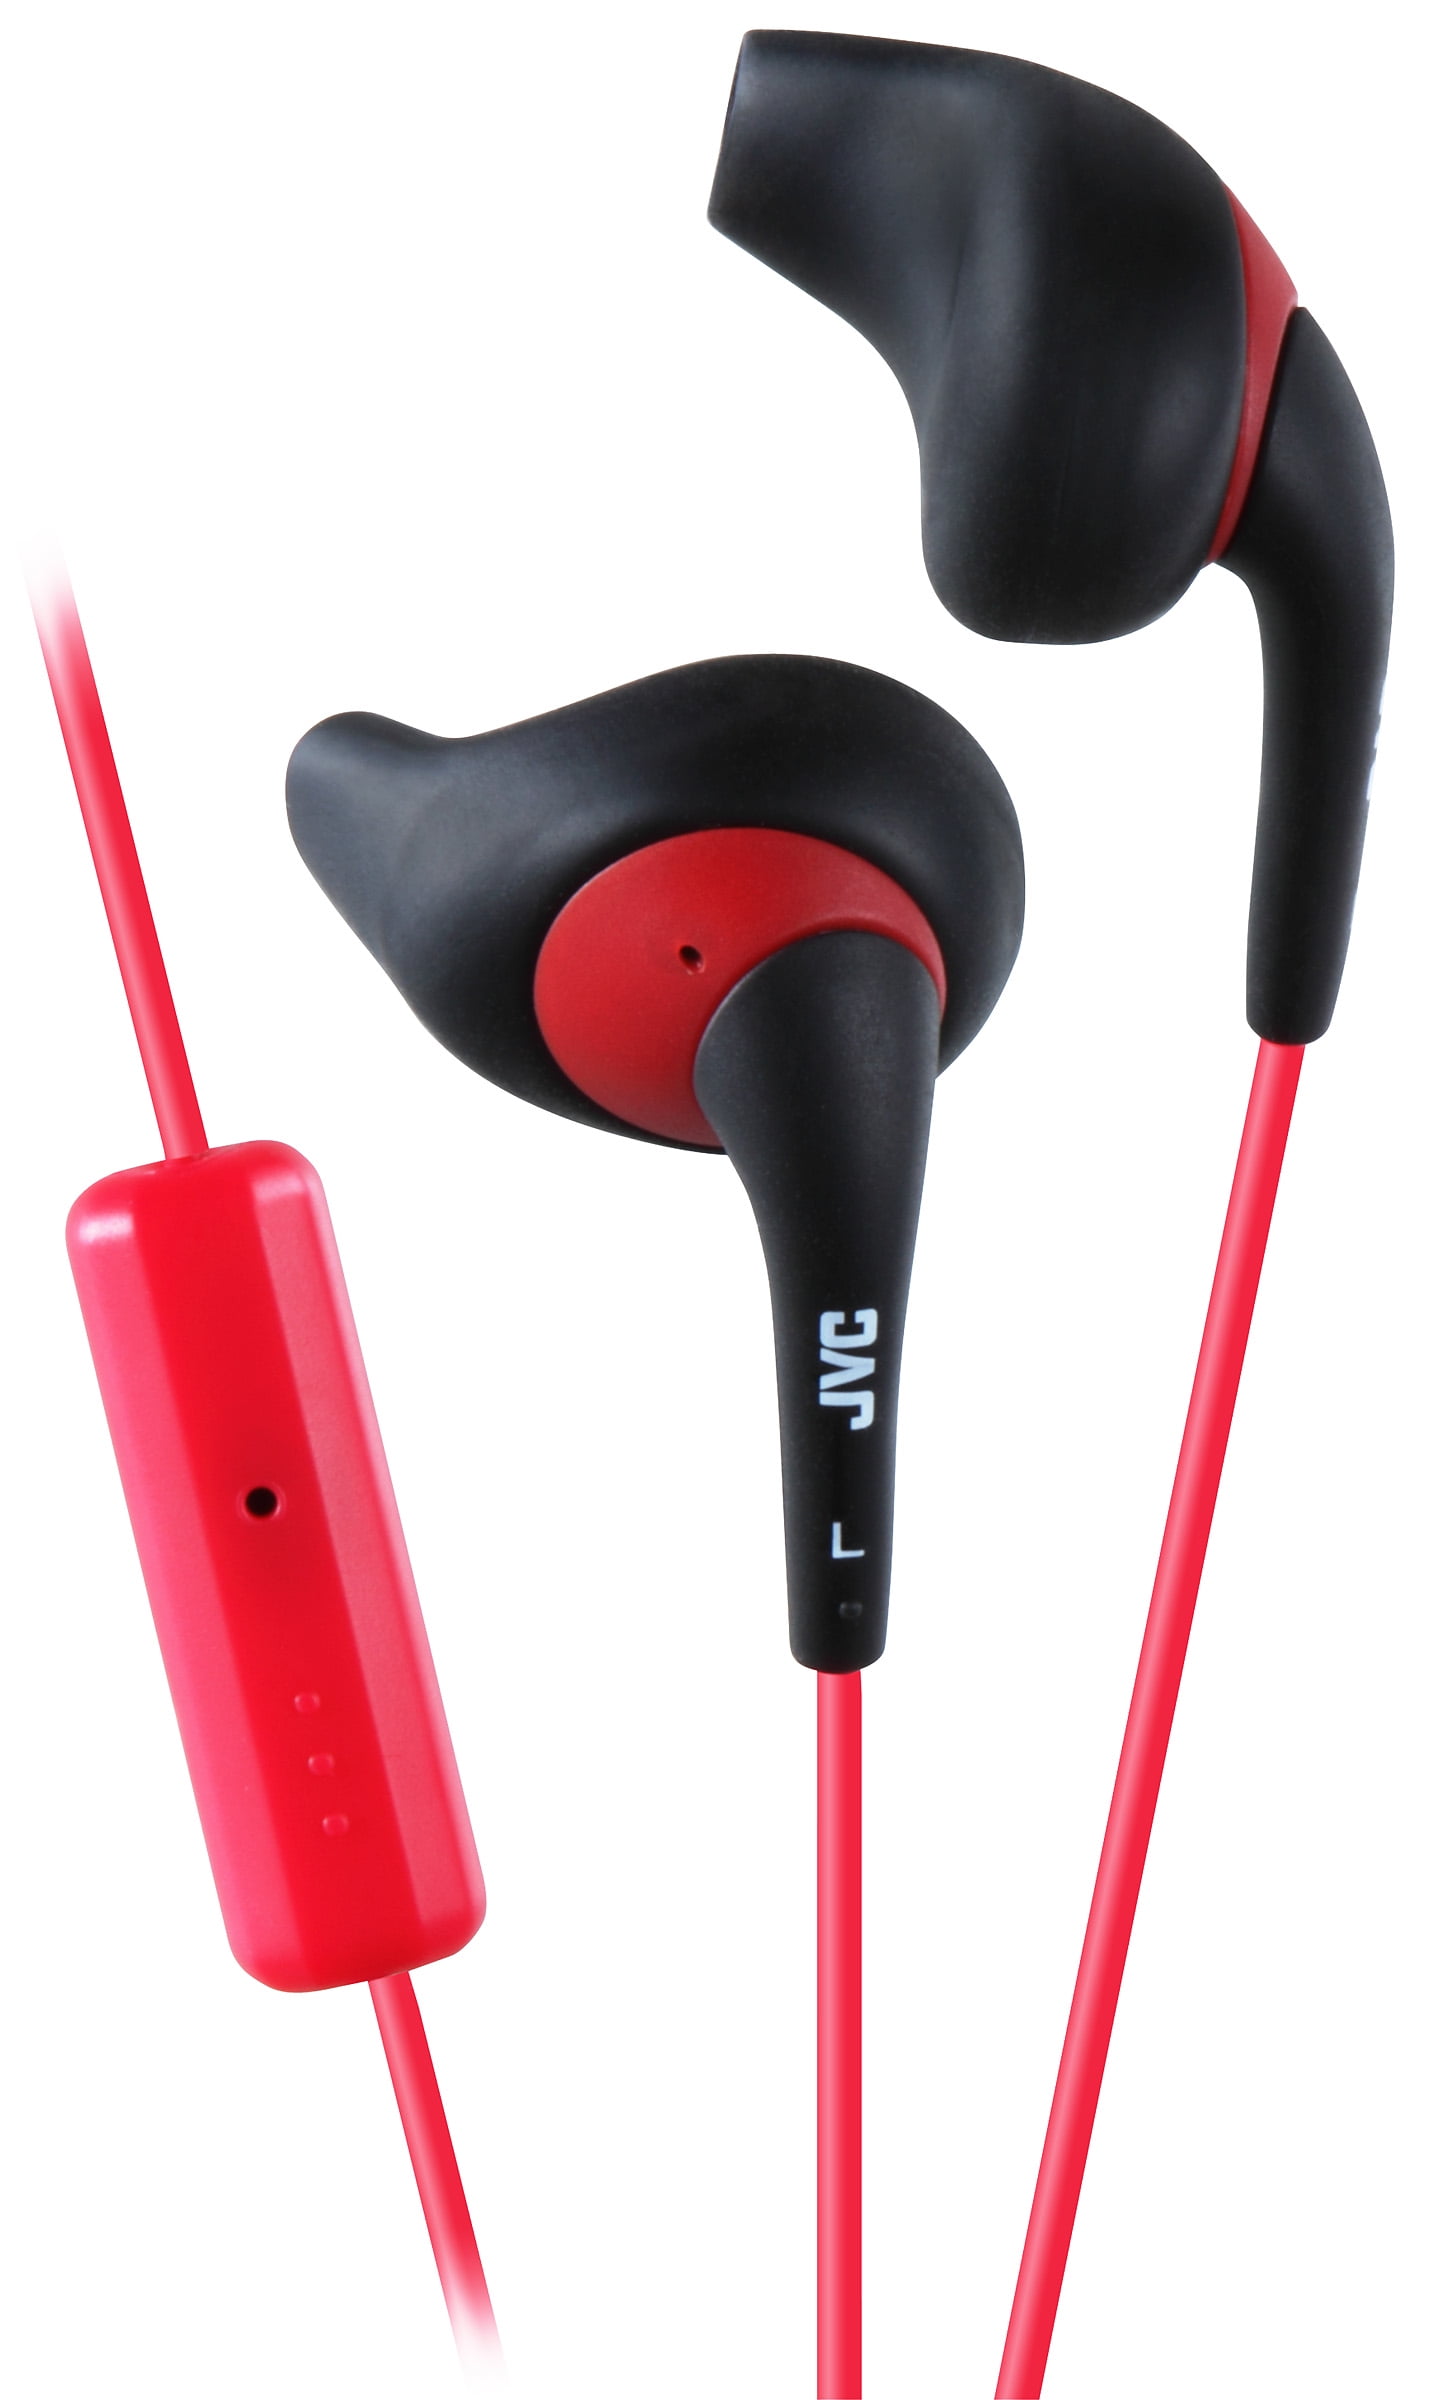 JVC Gumy Sport HA-ENR15 Earbuds - Nozzel Fit In Ear Headphones with Mic and  Remote, Sweat Proof, 3.3ft Color Cord with Slim Plug (Black/Red)